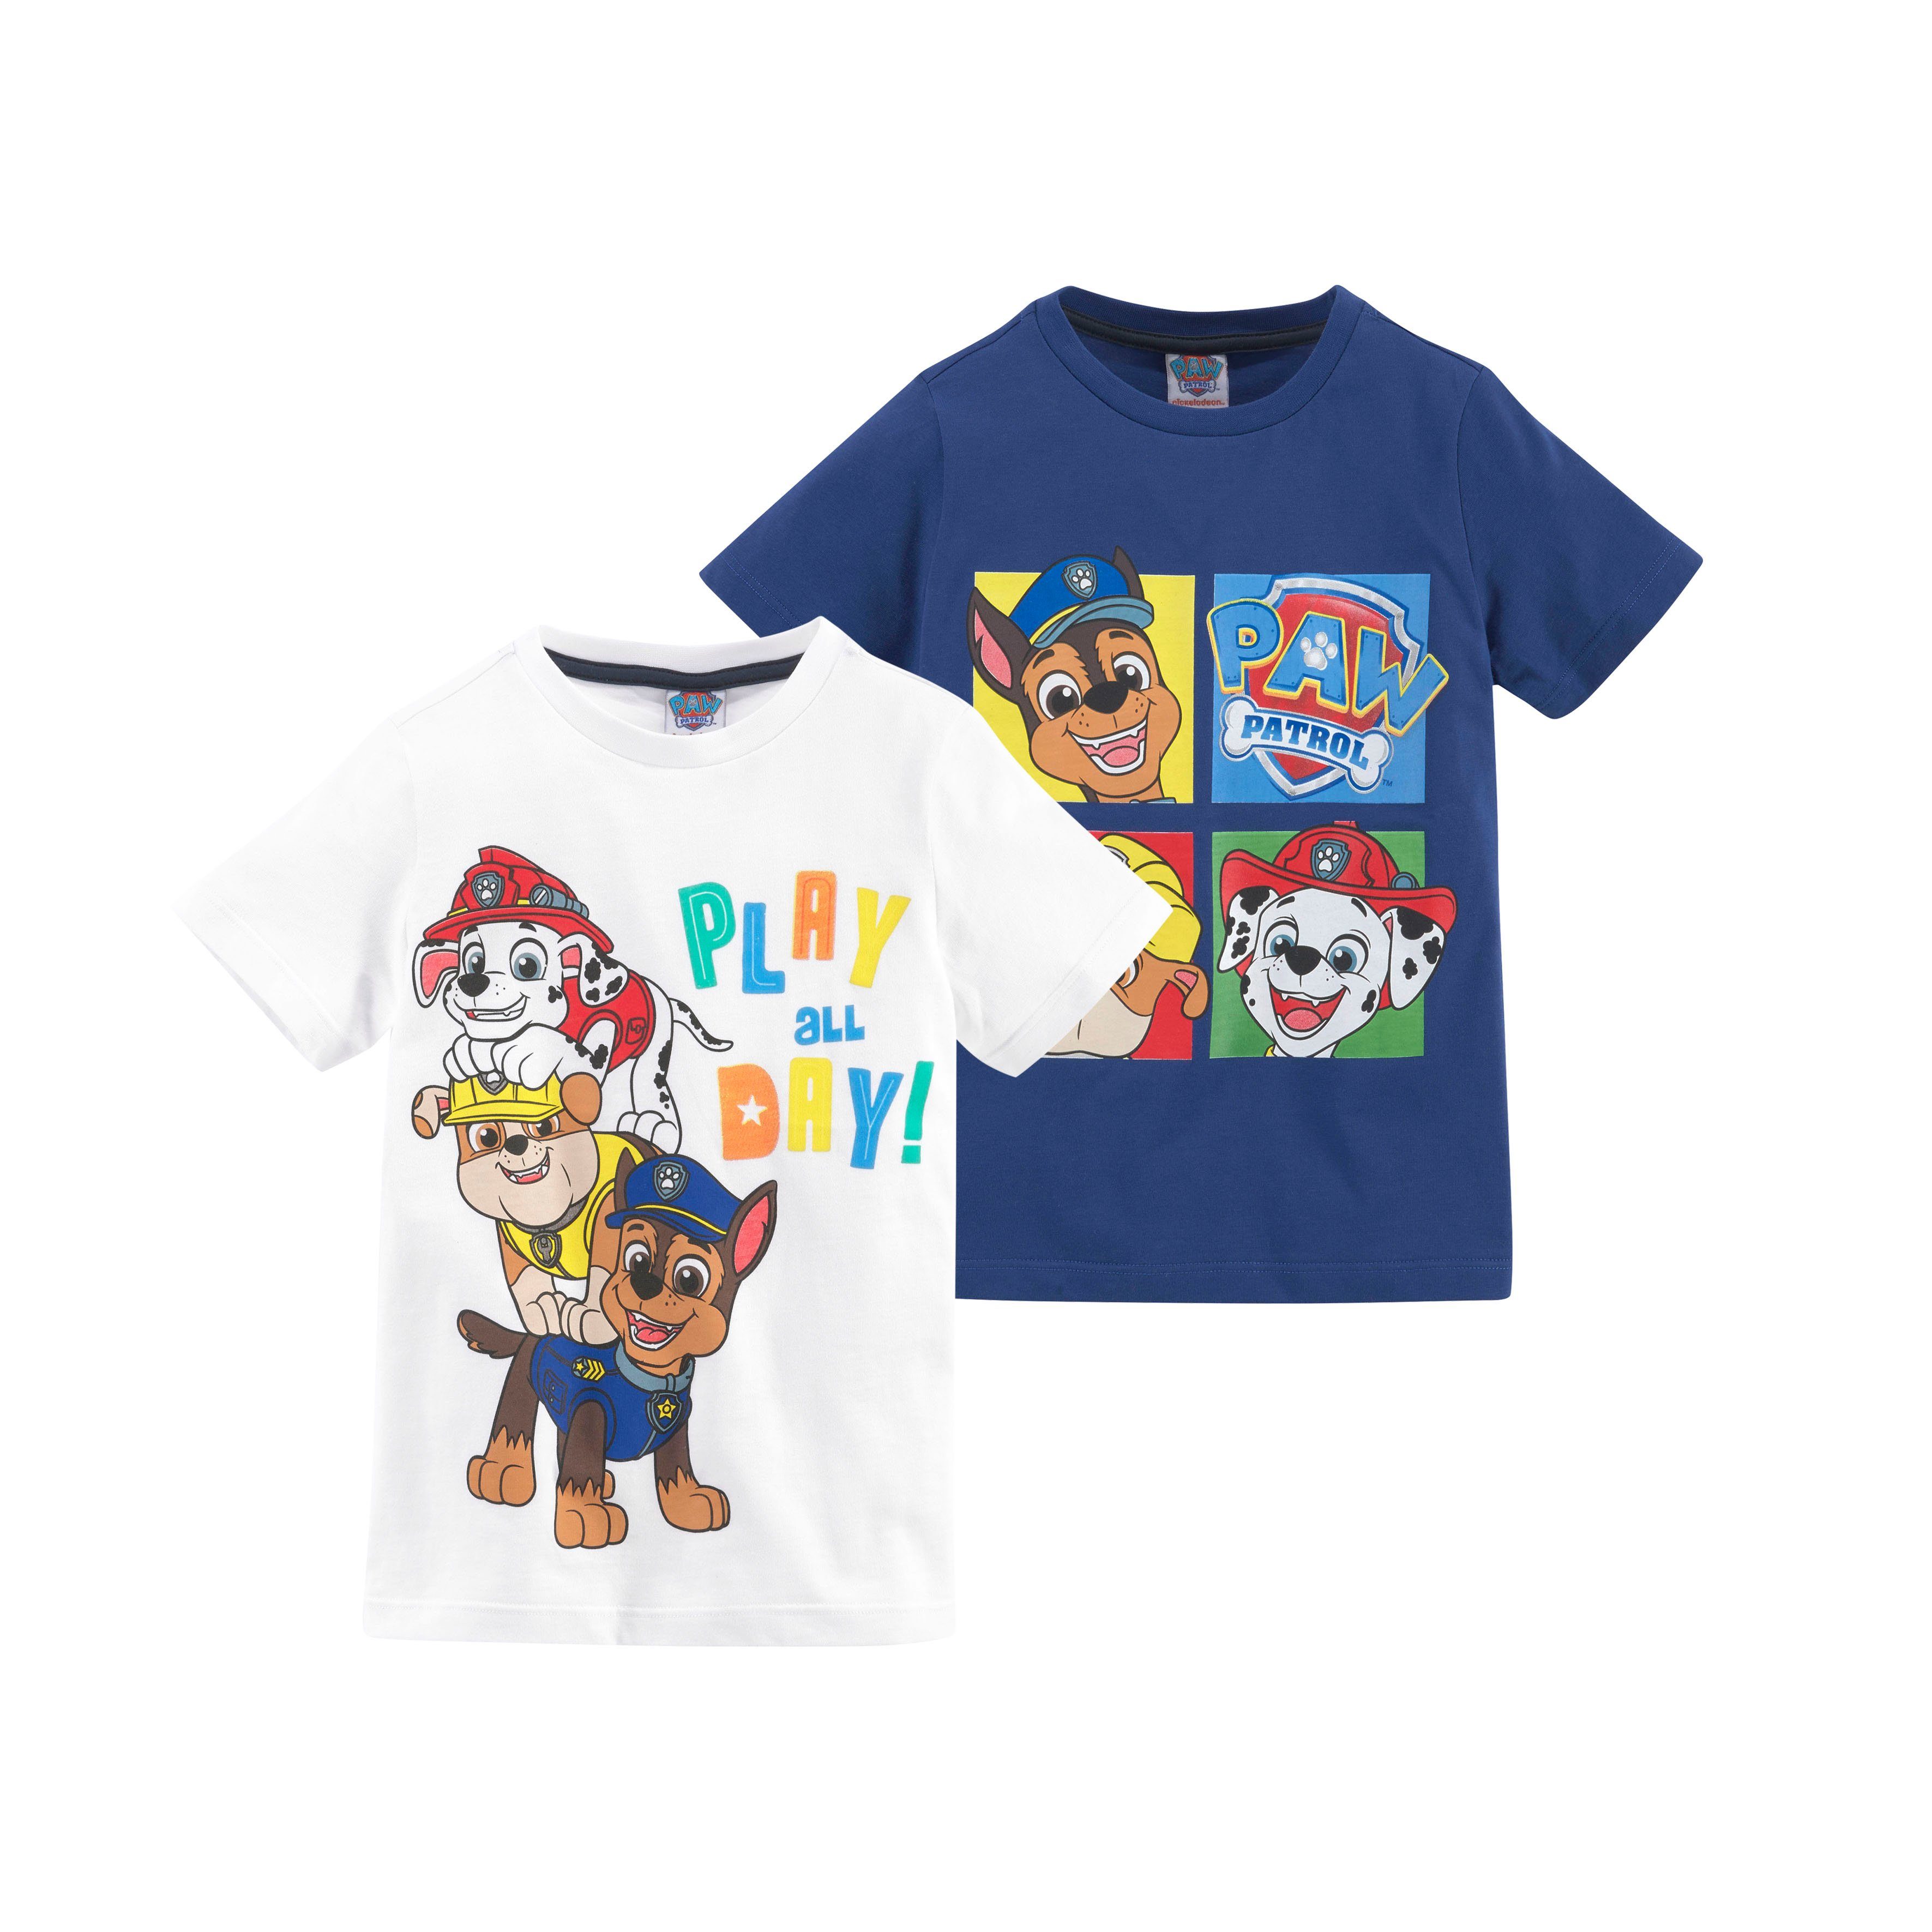 ALL DAY! PAW PLAY PATROL 2-tlg) (Packung, T-Shirt